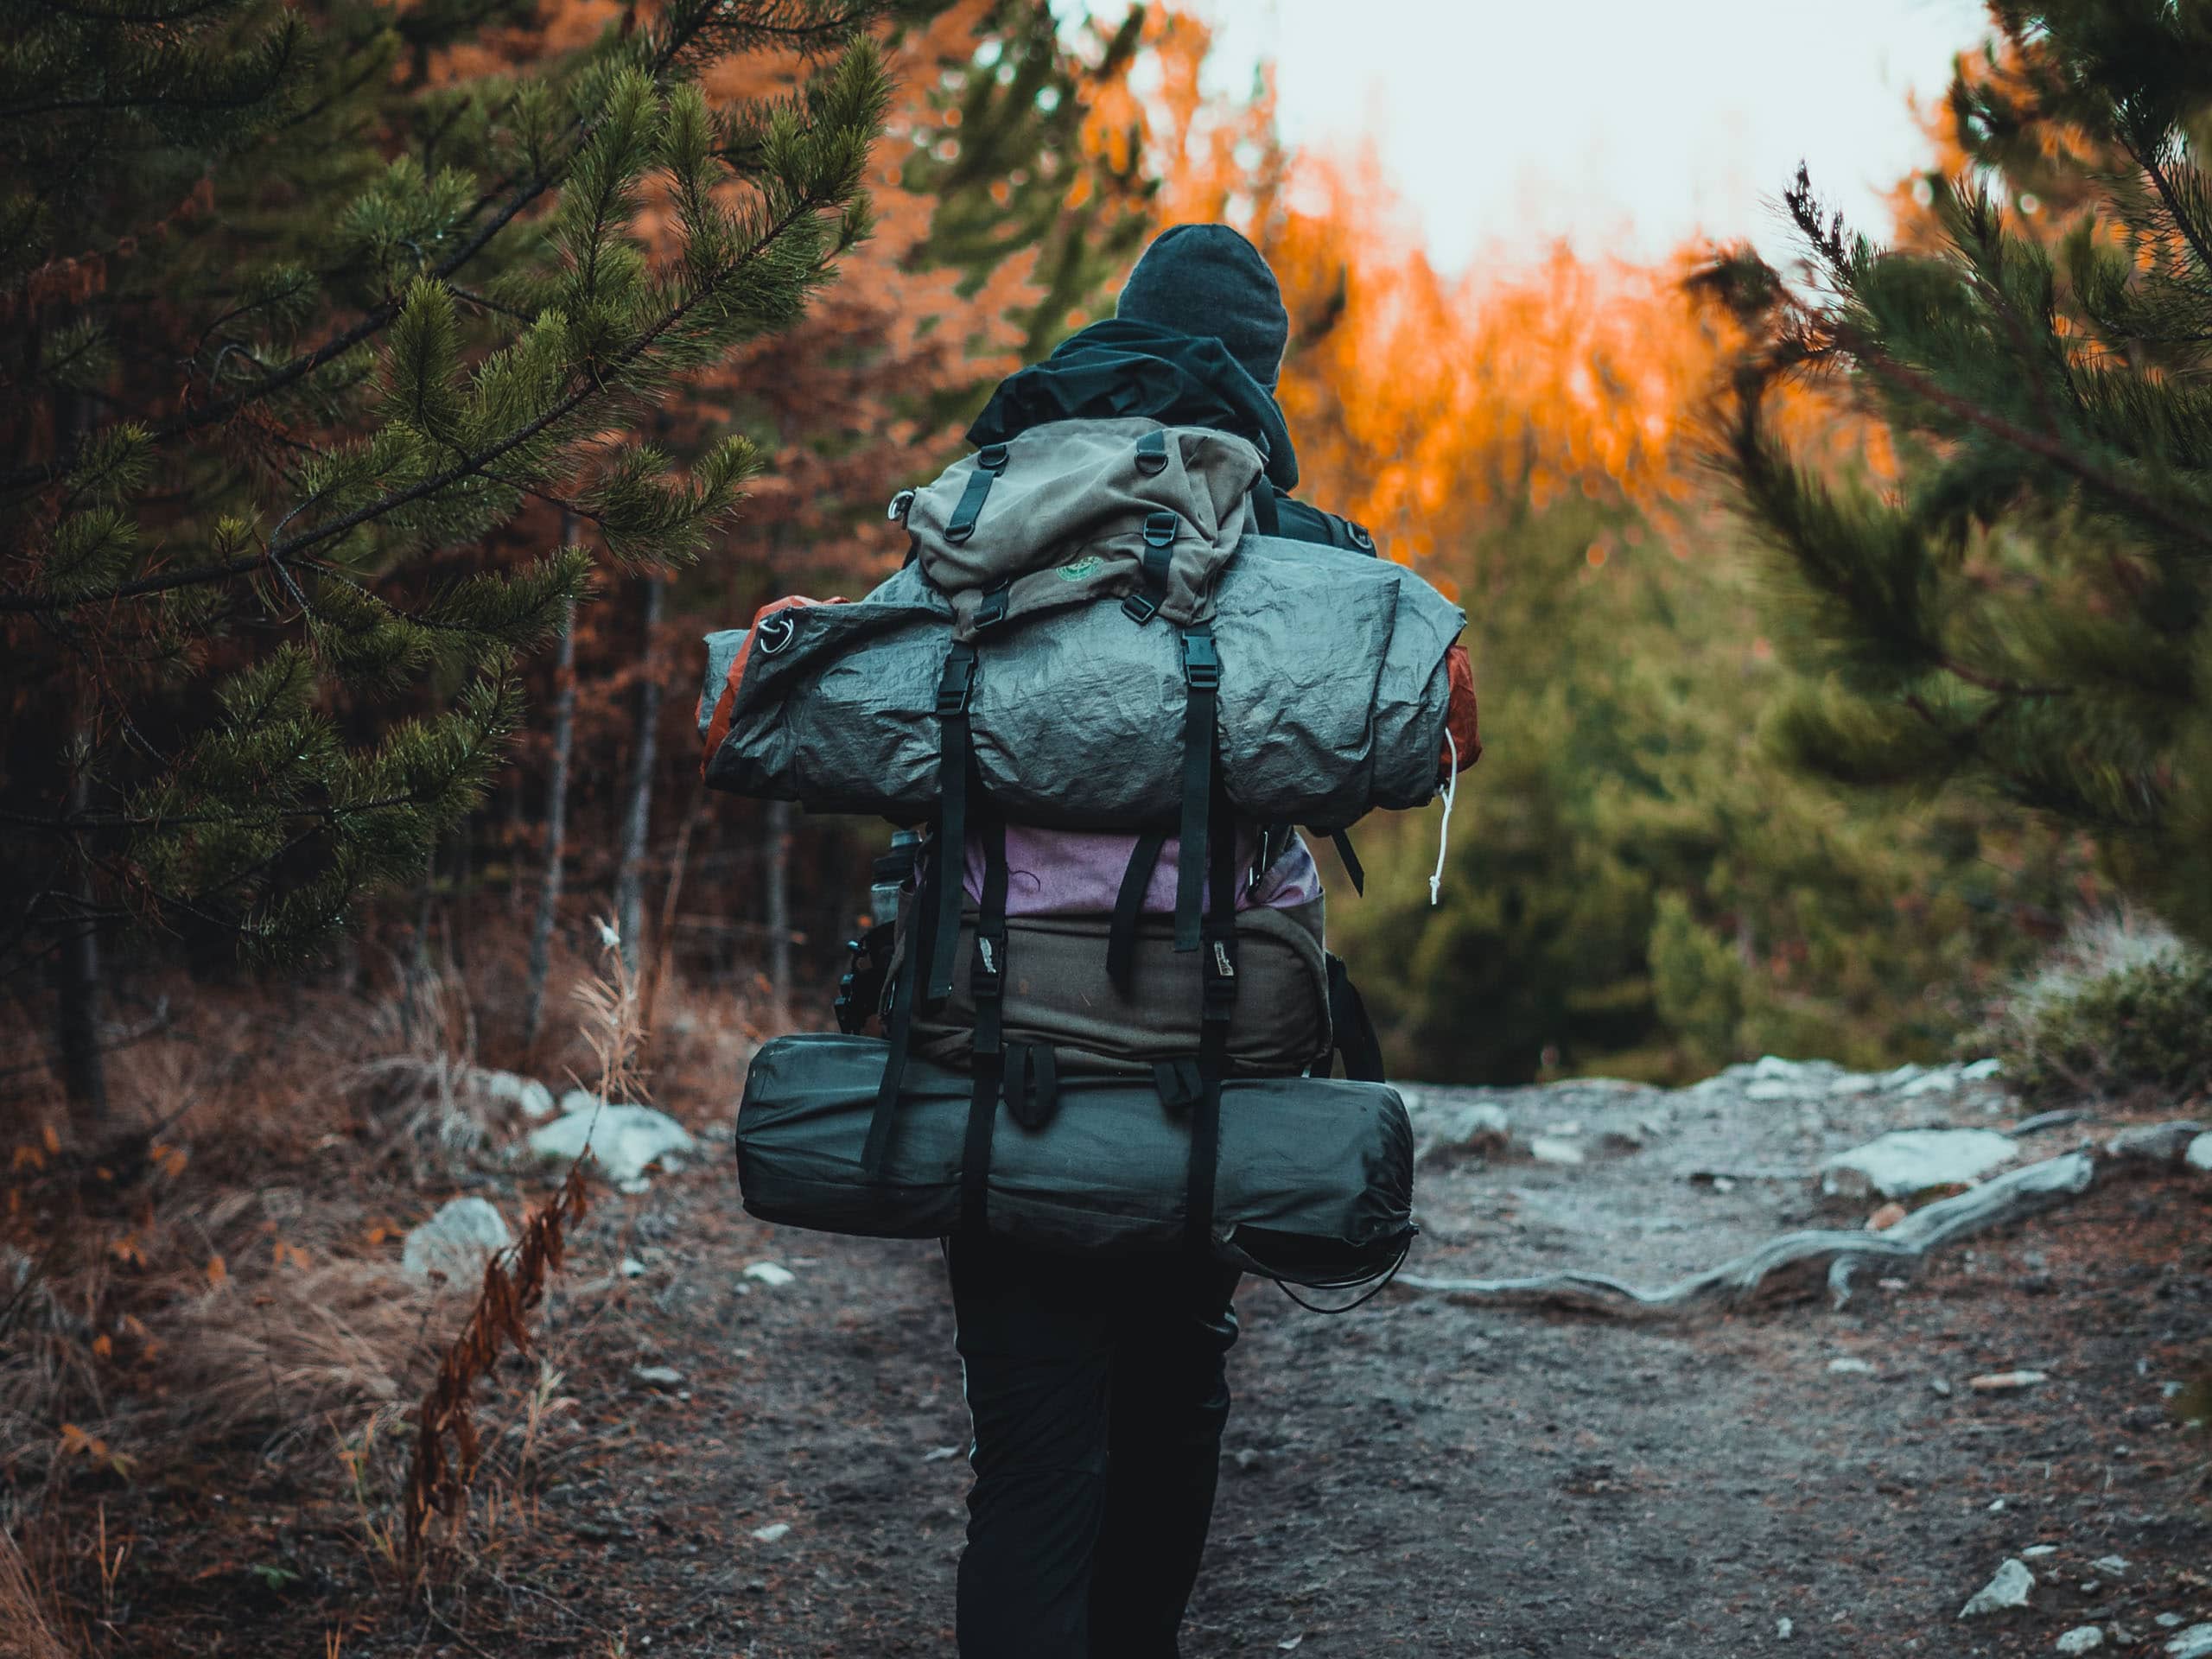 Consider what to pack for a backpacking adventure